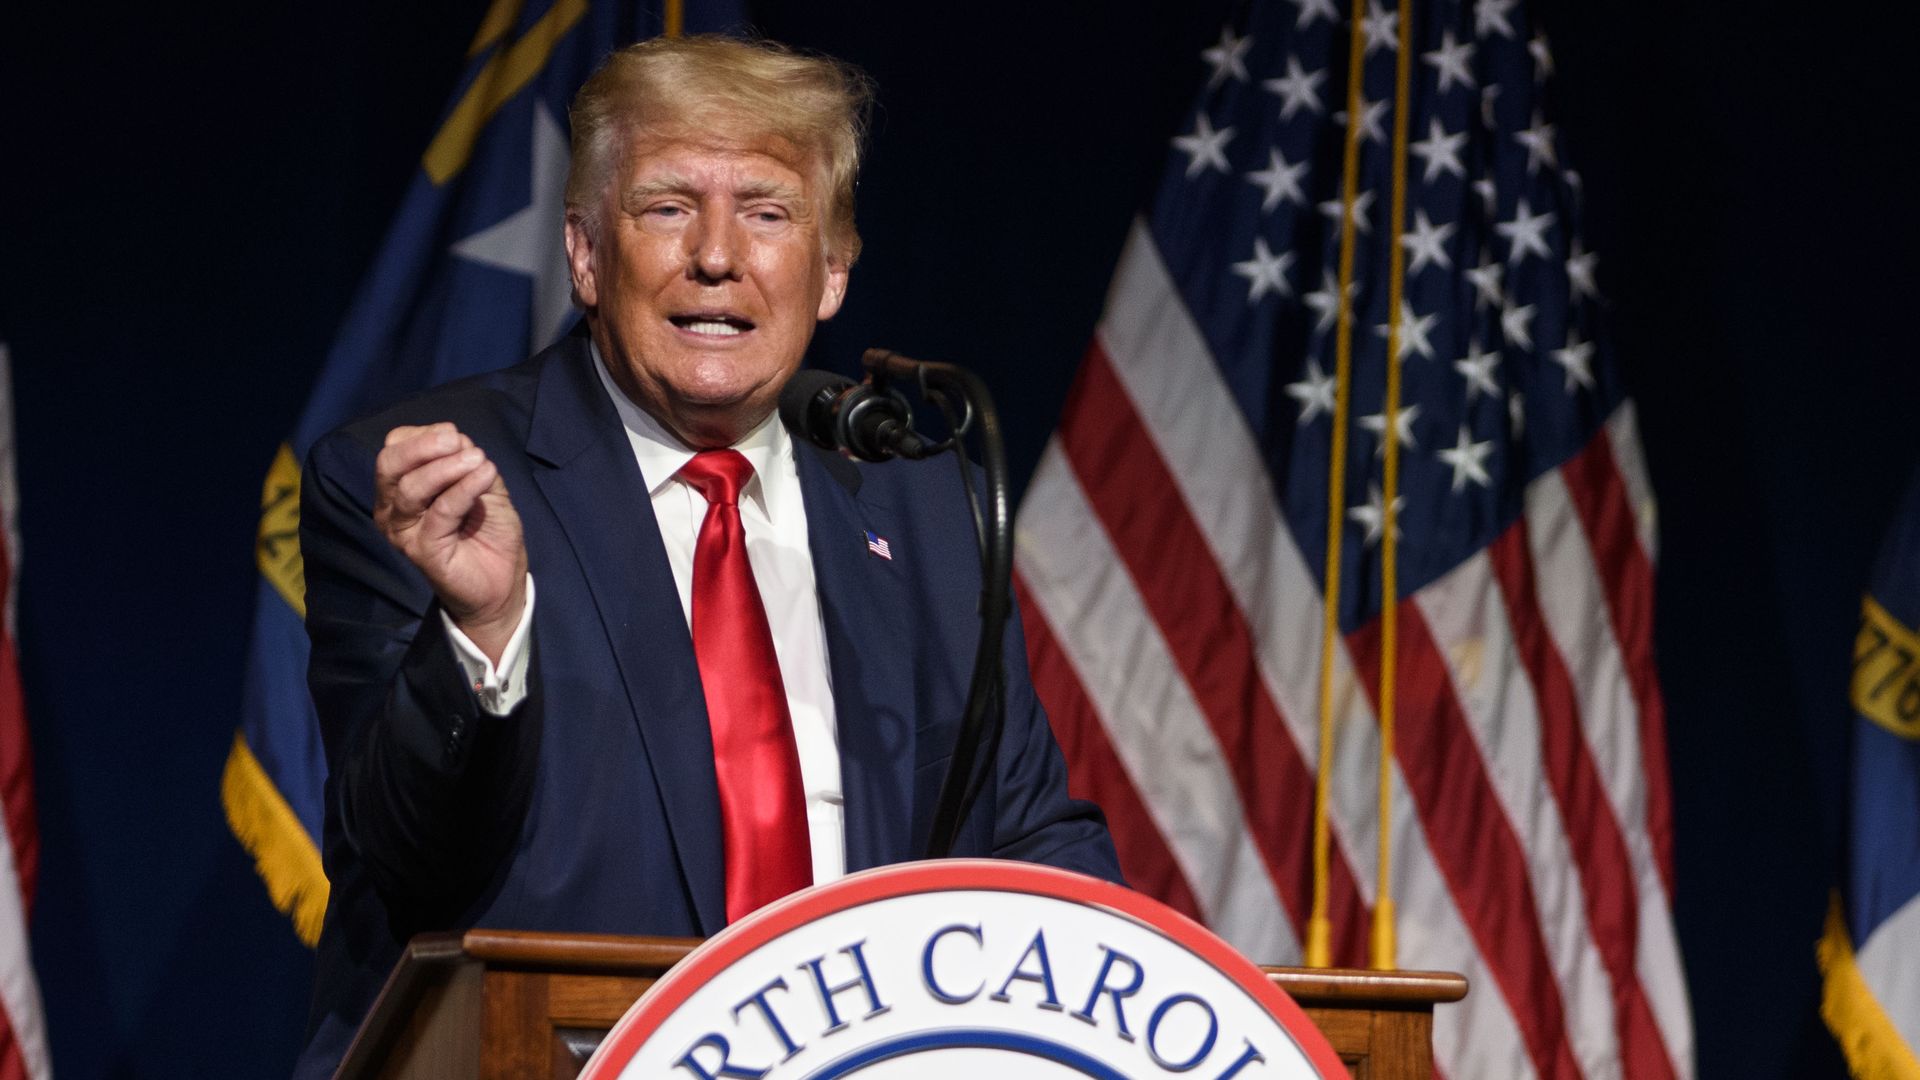 Former U.S. President Donald Trump addresses the NCGOP state convention on June 5, 2021 in Greenville, North Carolina.